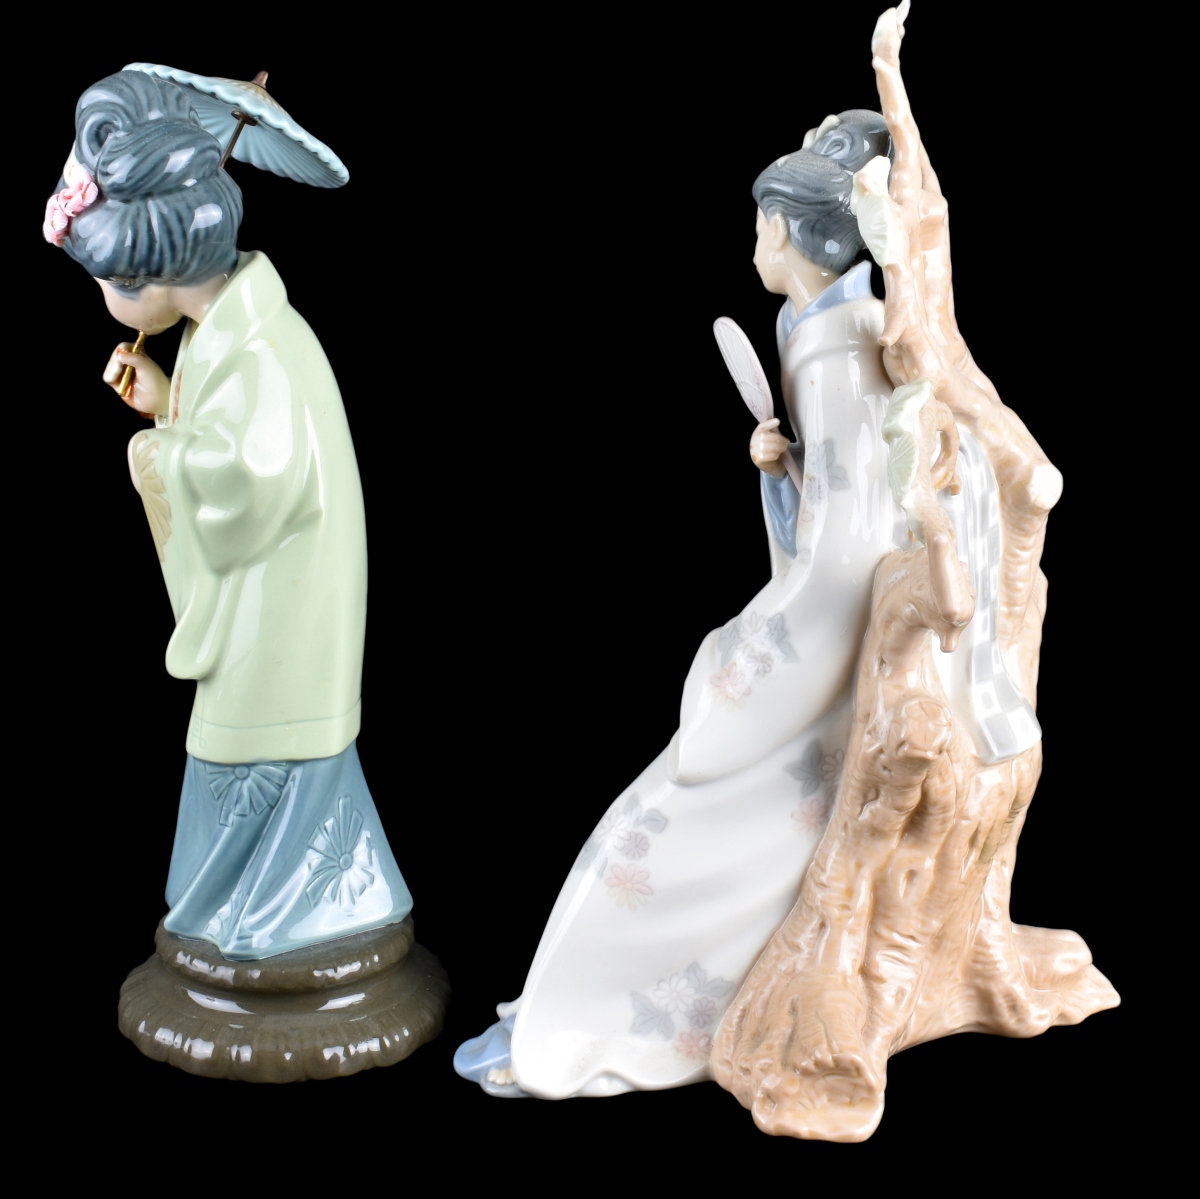 Grouping of Two (2) Lladro Porcelain Figurines